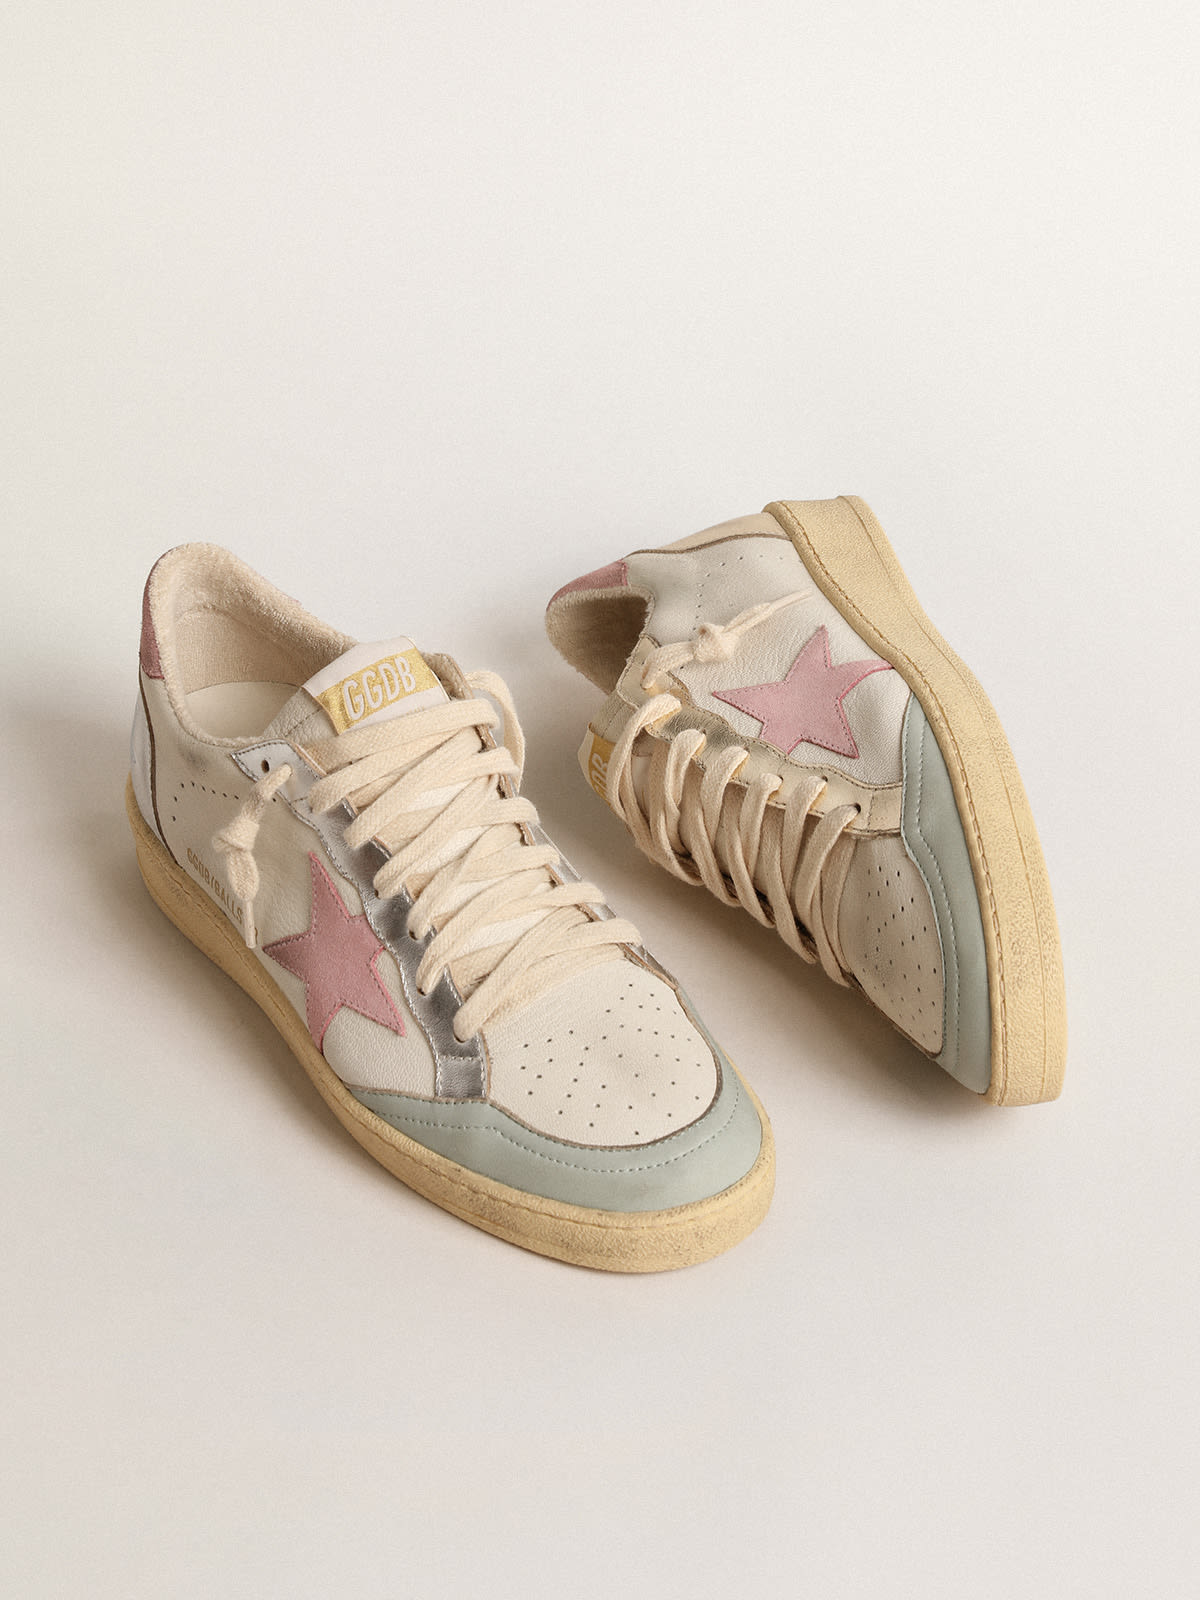 Golden Goose - Ball Star with pink suede star and metallic leather inserts in 